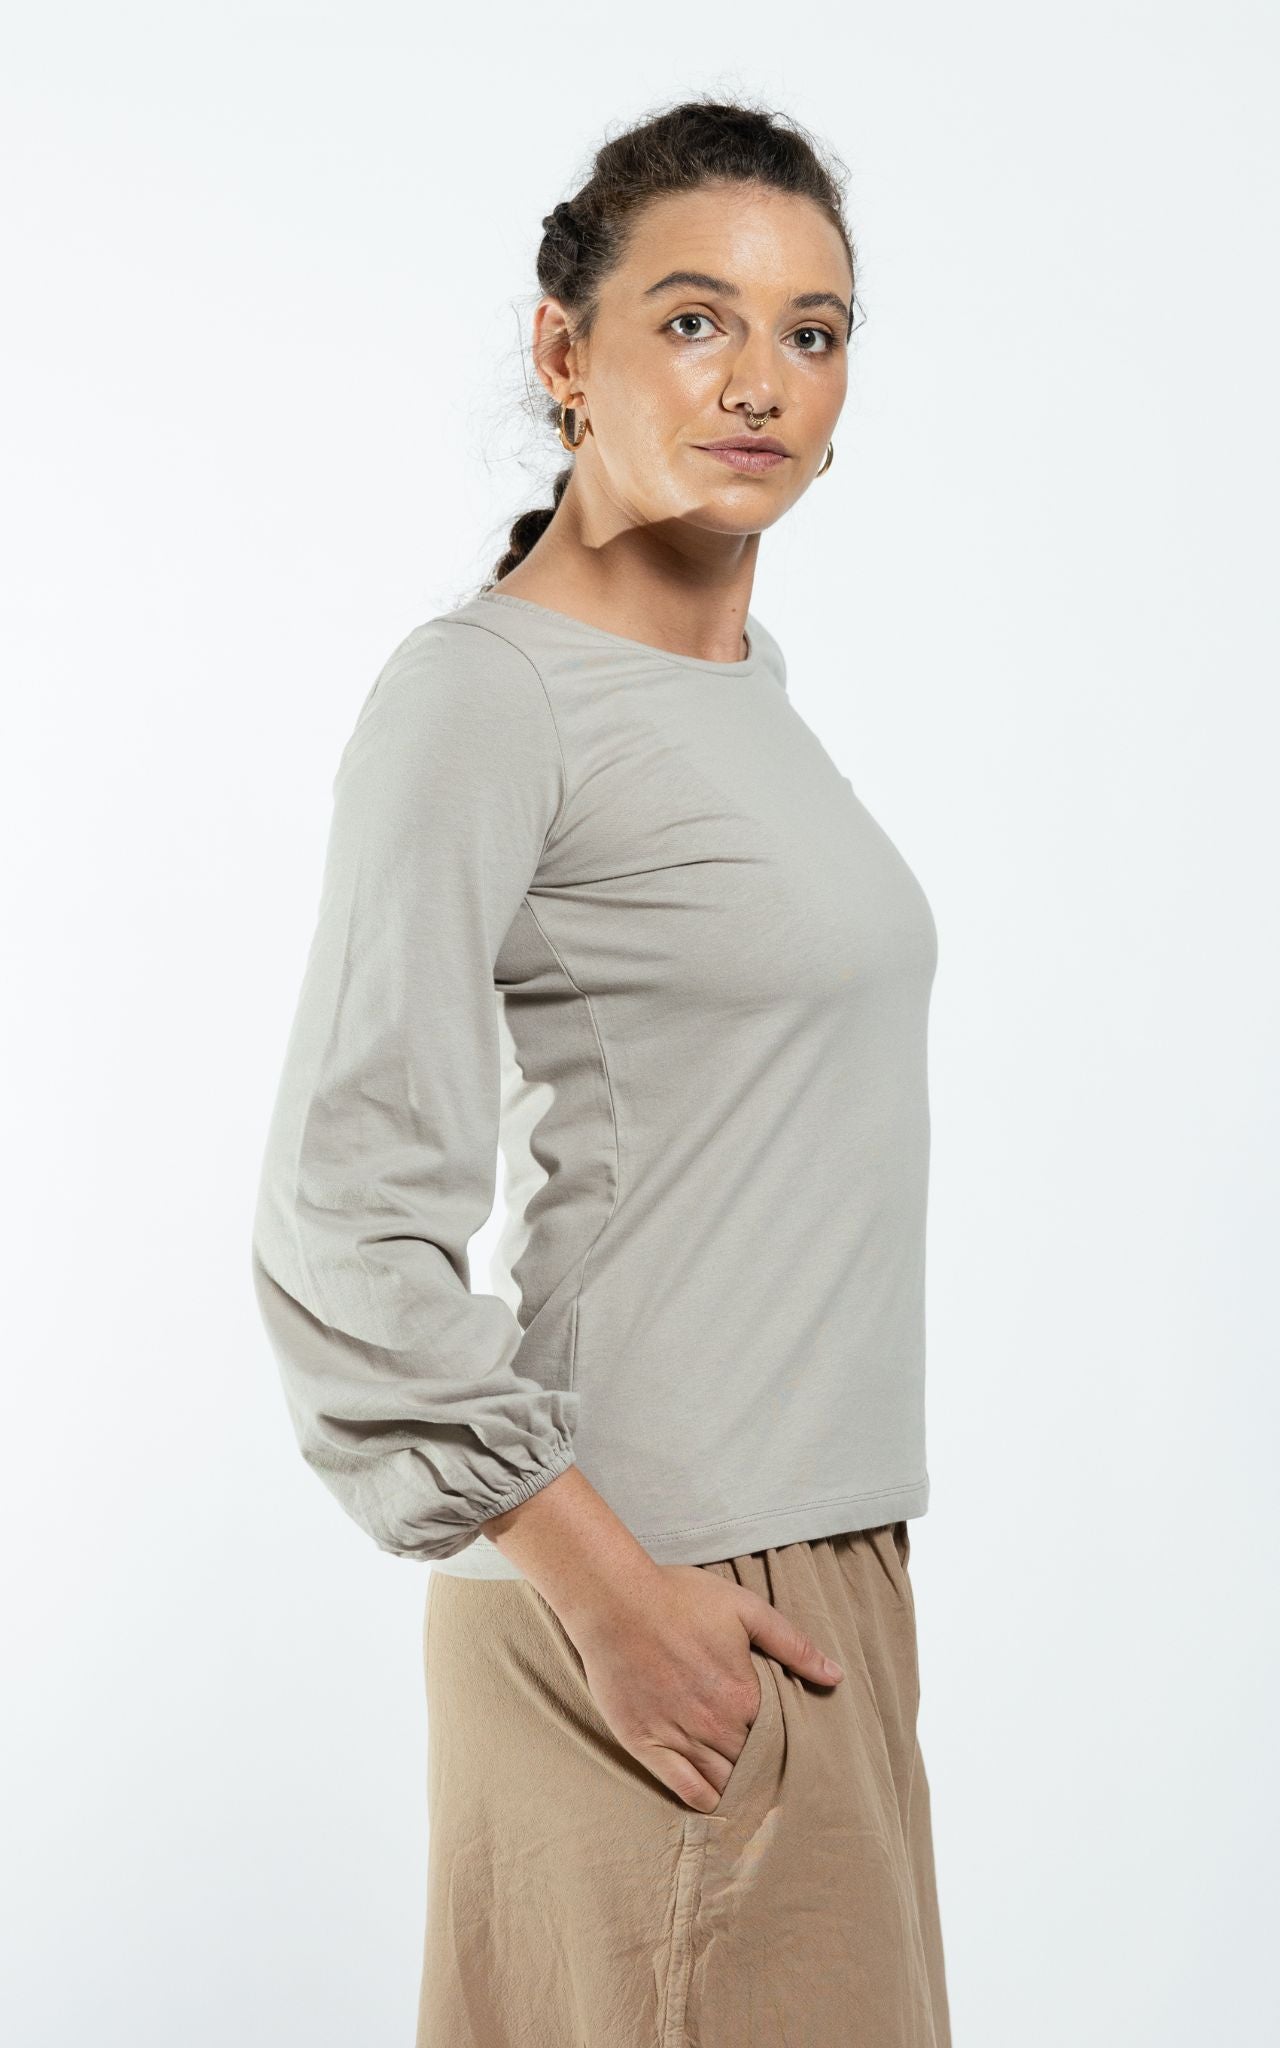 Surya The Label Ethical Organic Cotton 'Zoé' Top made in Nepal - Oyster